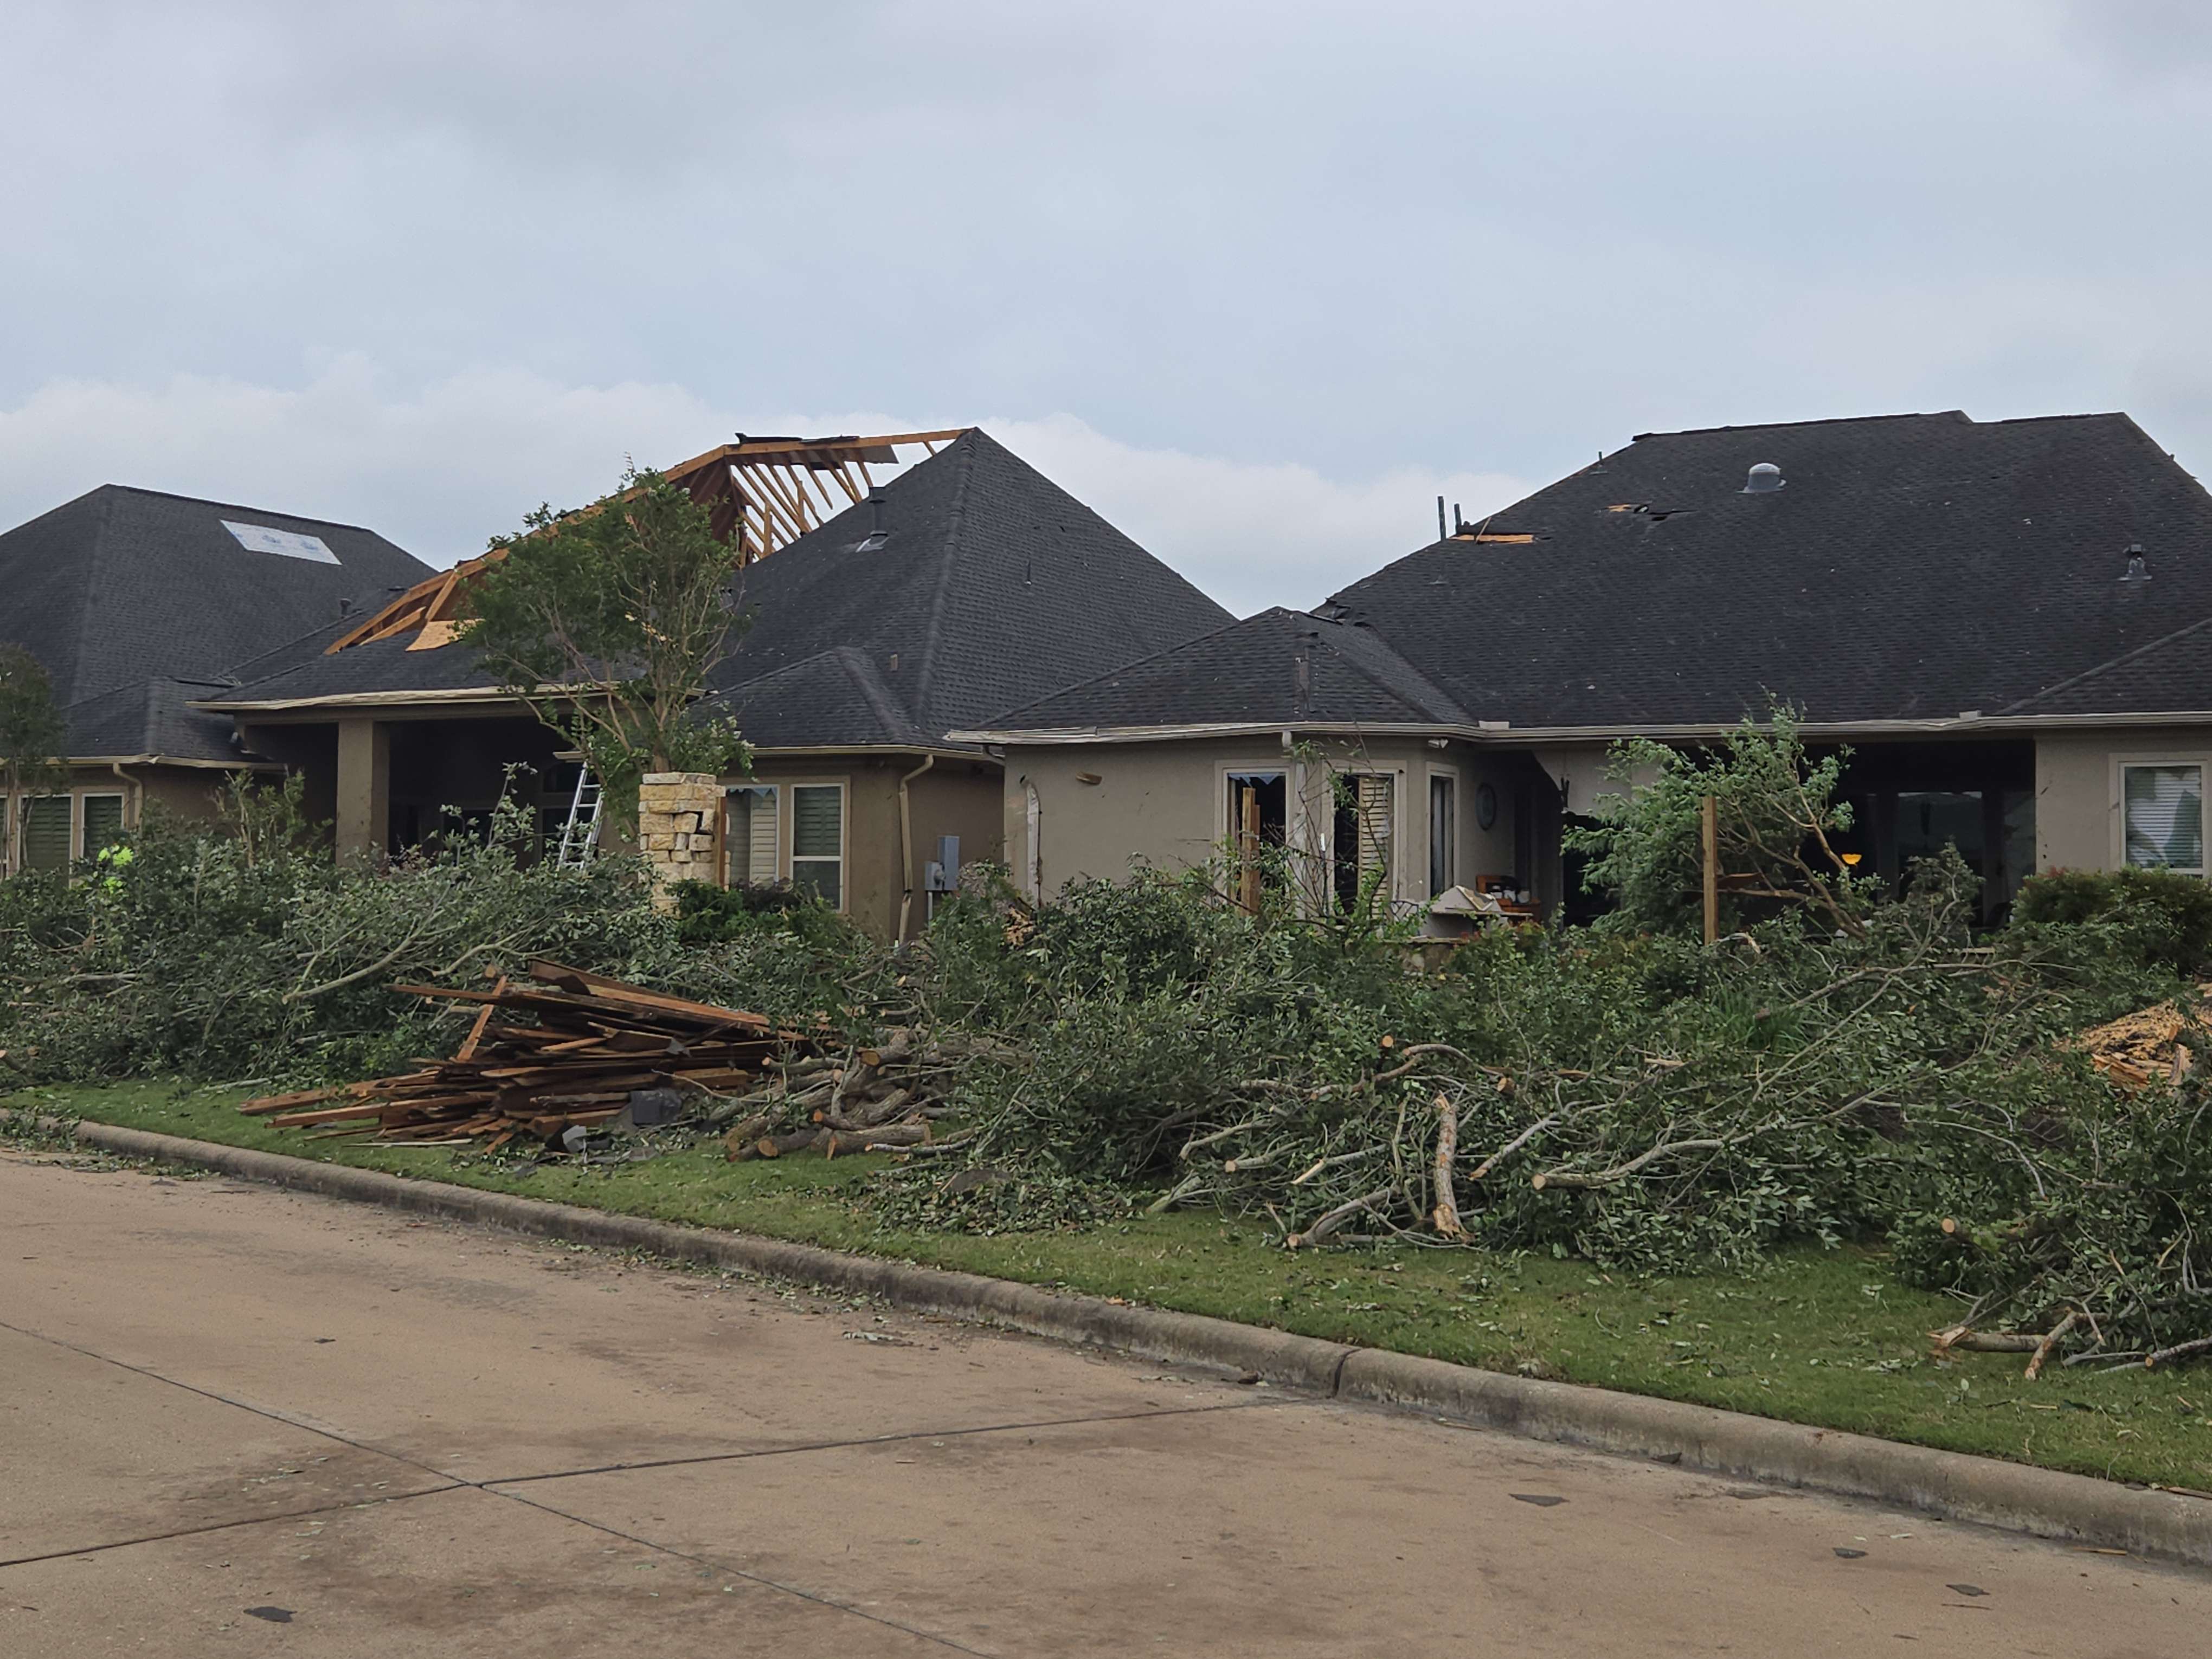 EF1 damage to homes in Cypress, Texas.